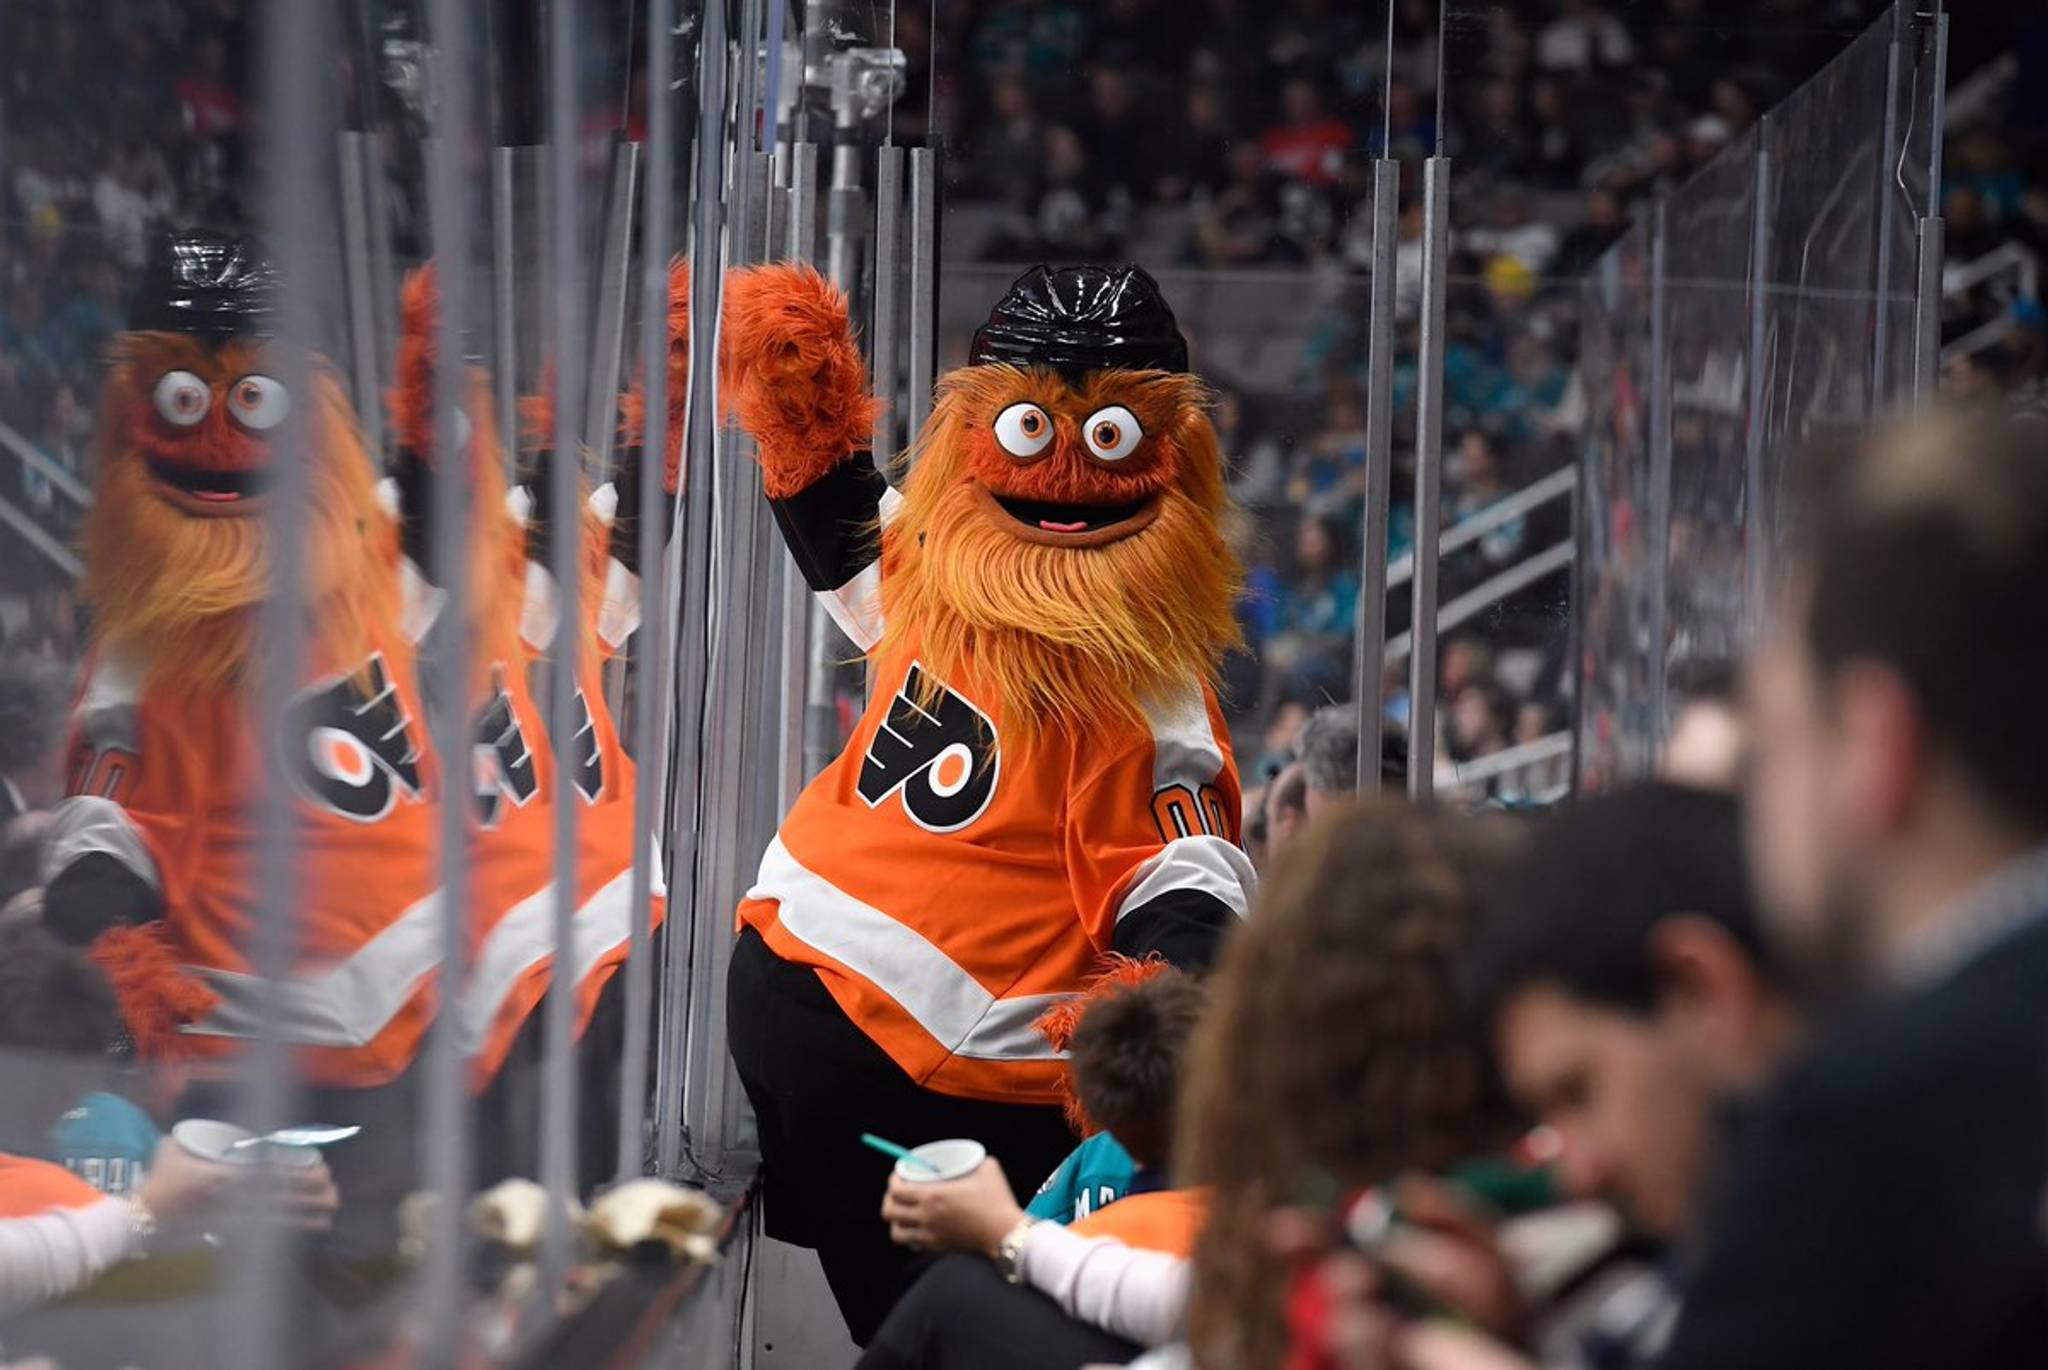 Gritty: a memefied mascot who transcends sport